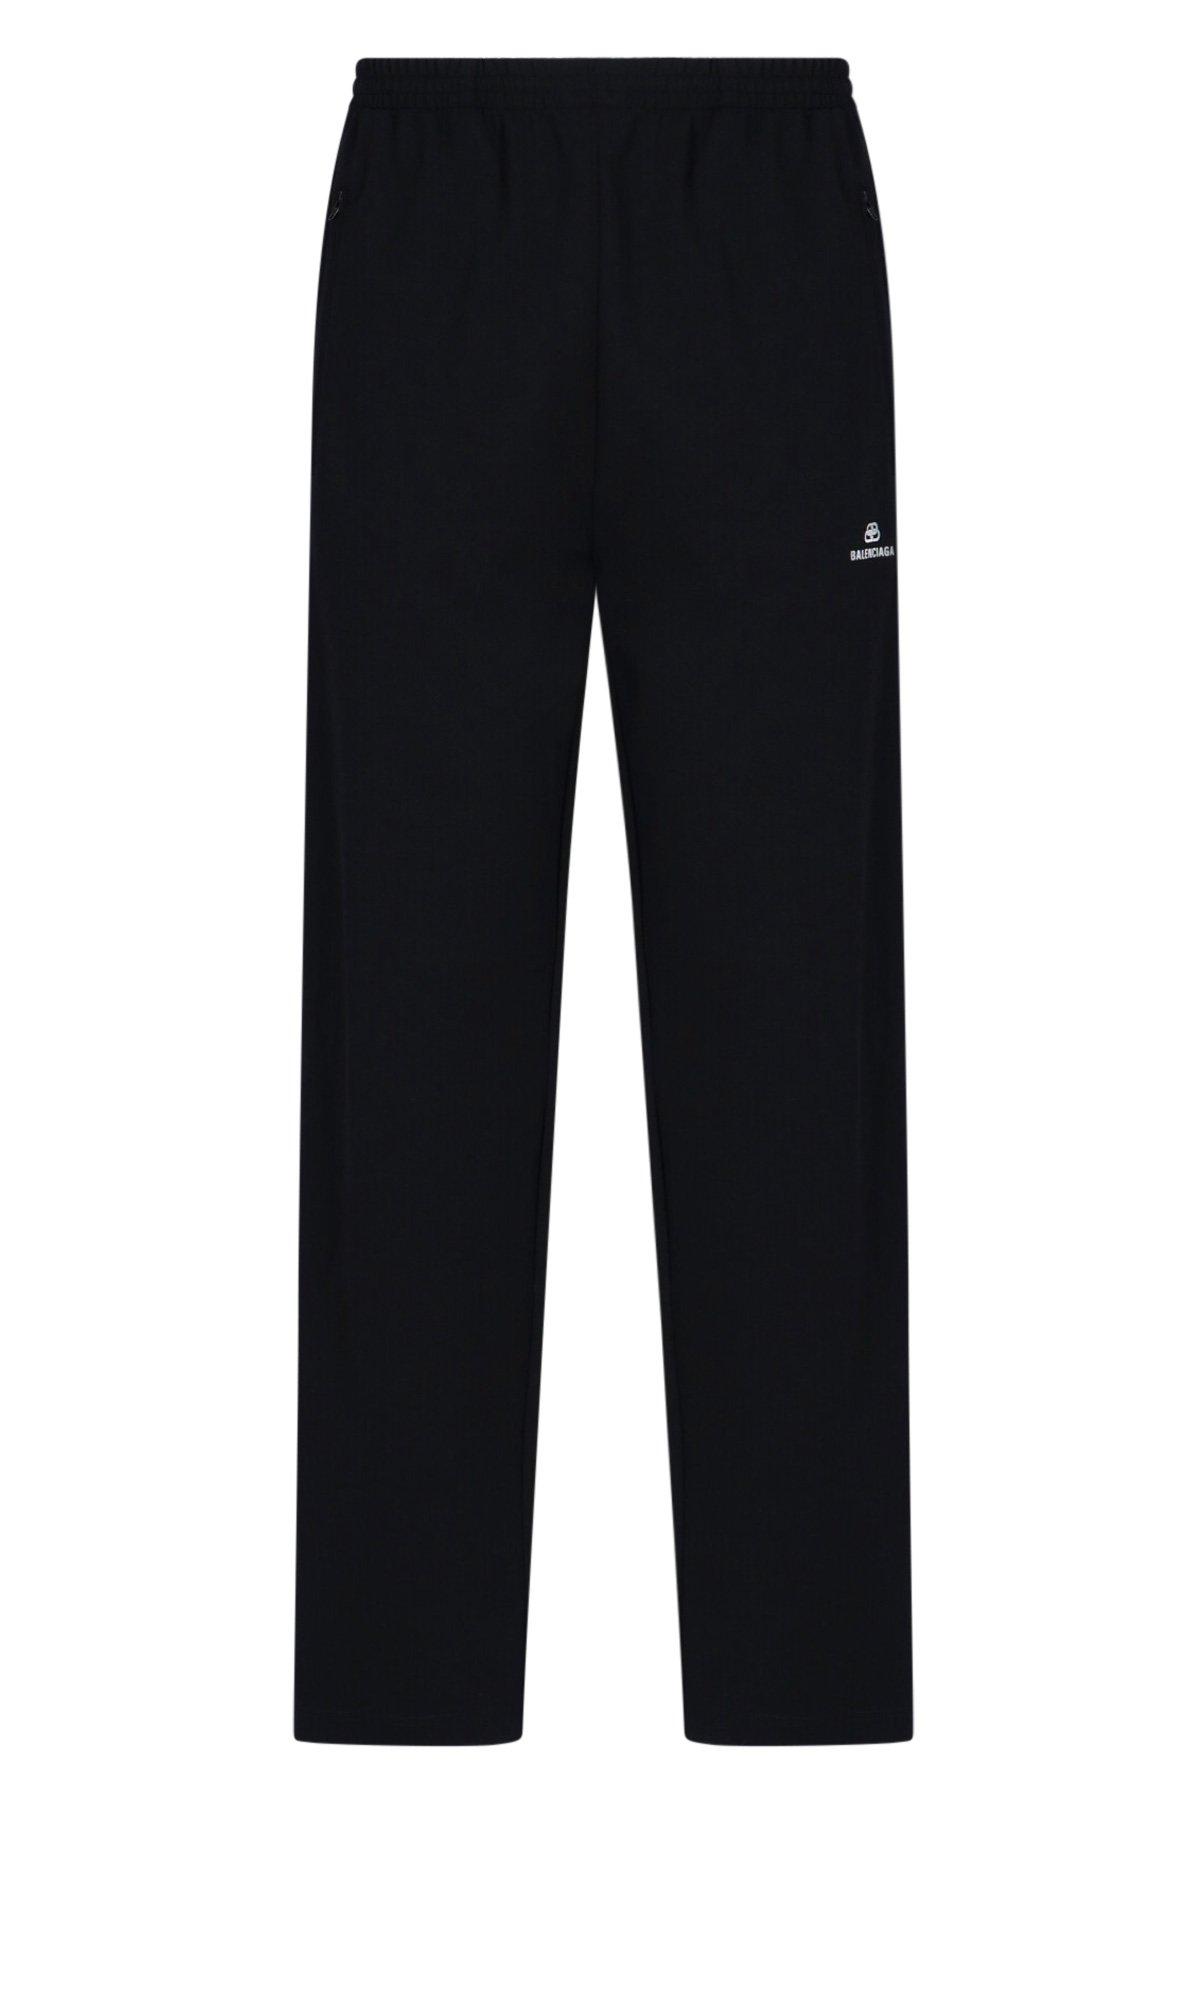 Balenciaga Synthetic Logo Track Pants in Black for Men - Lyst